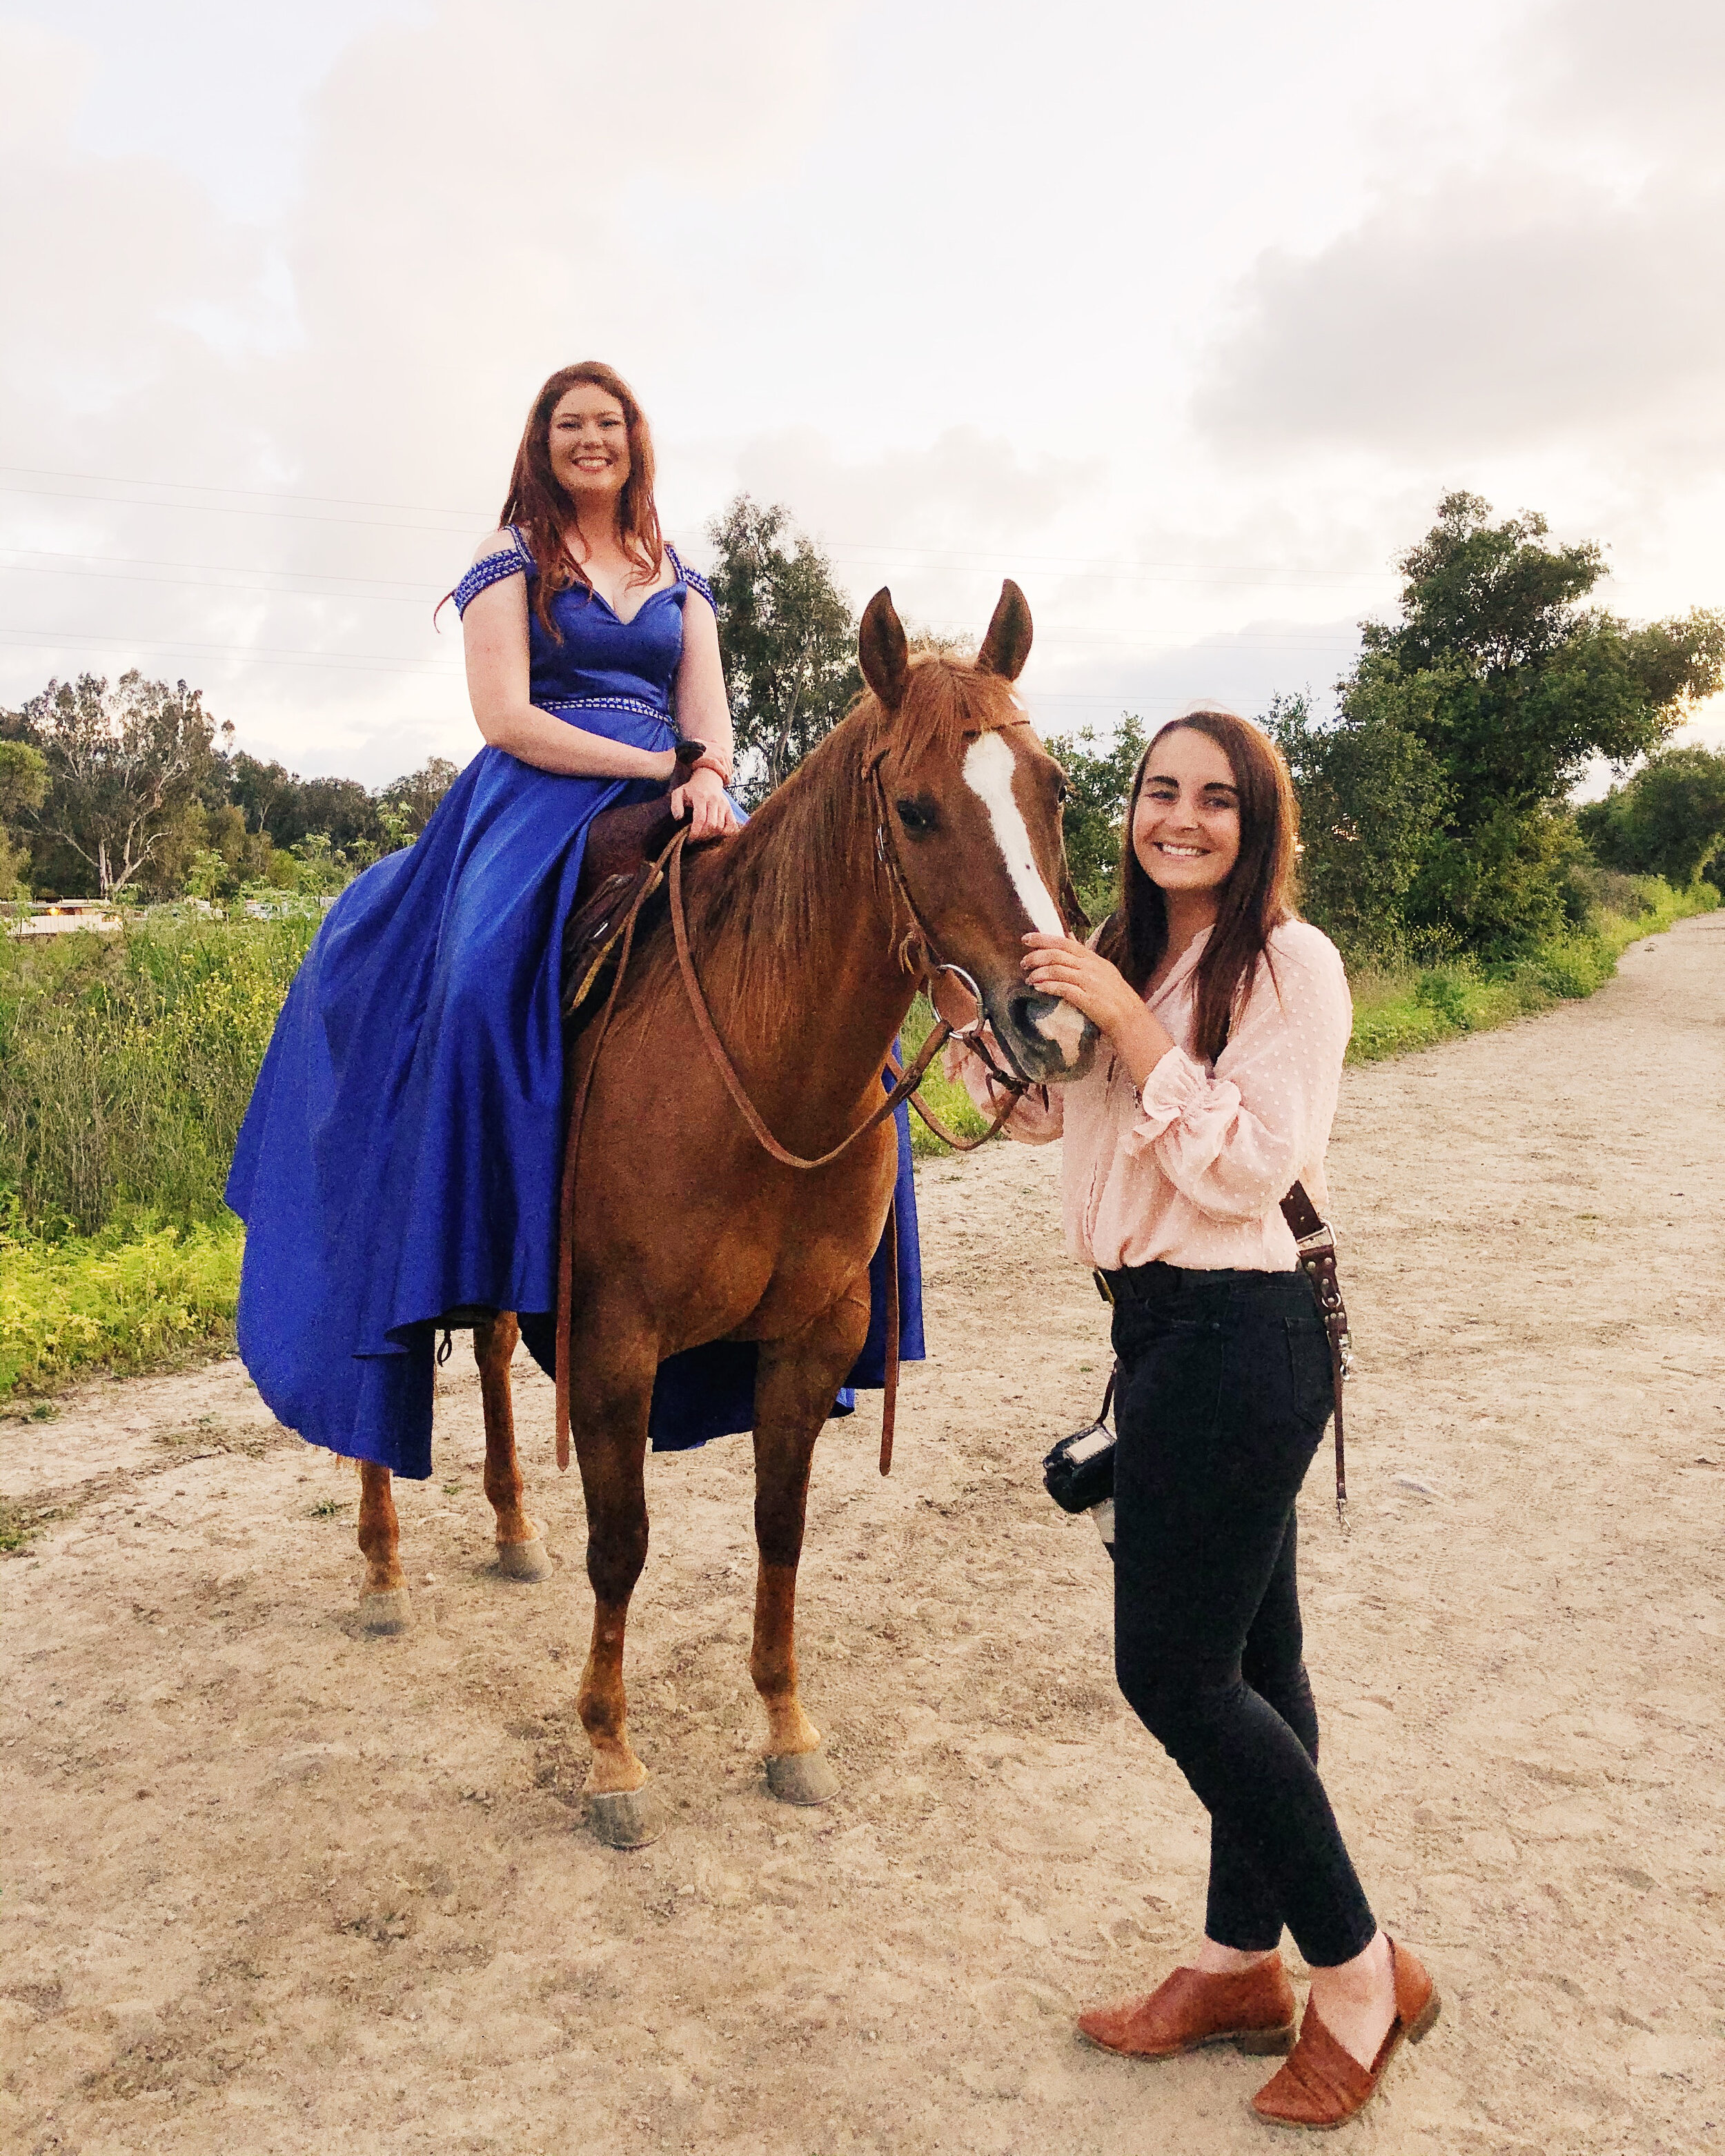 behind the scene with model and horse